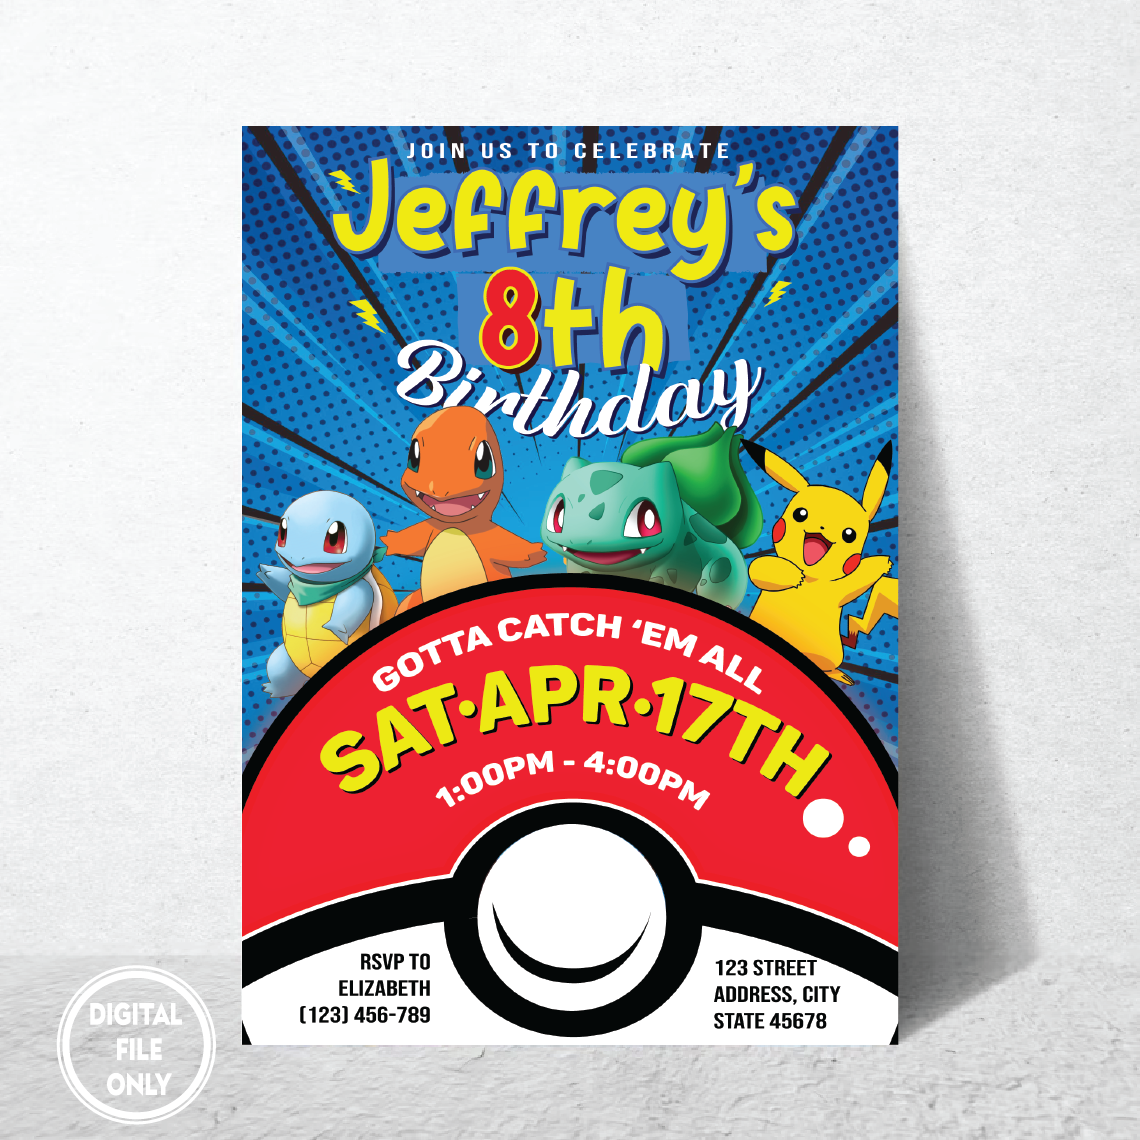 Personalized File Pokemone Birthday Invitation, Pokemon Birthday Invitation, Pokemon Invitation, Pikachu Invitation, Pikachu Party Invite, Instant Download. PNG File Only